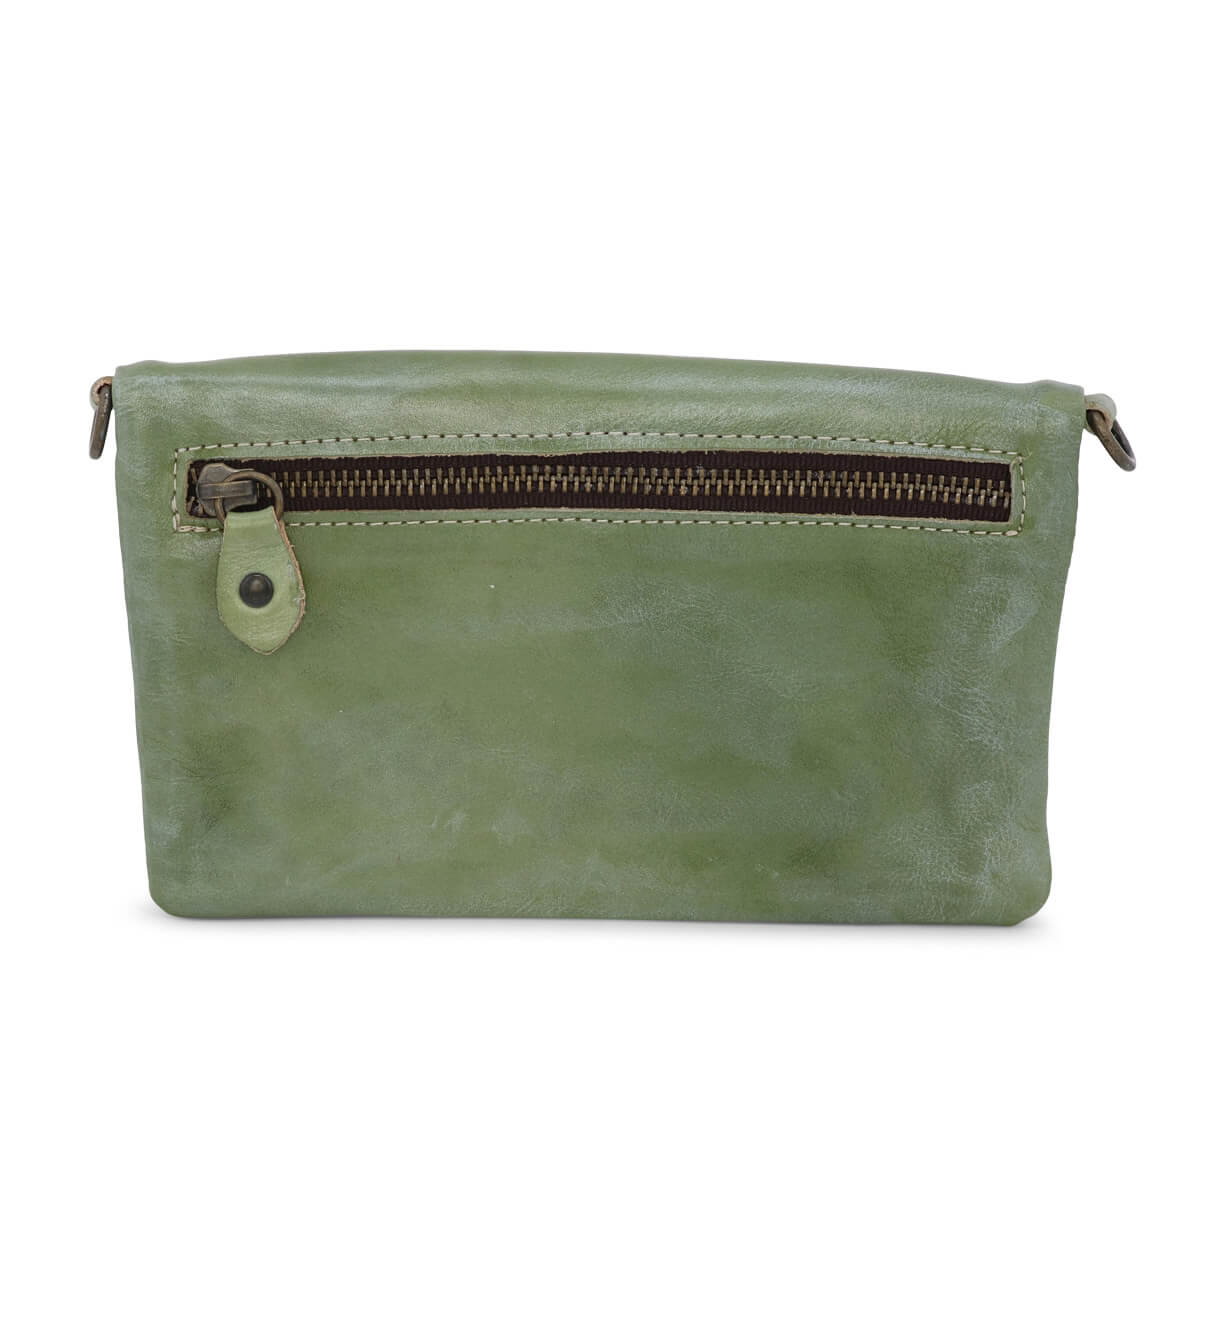 A Cadence by Bed Stu green leather bag with a zipper.